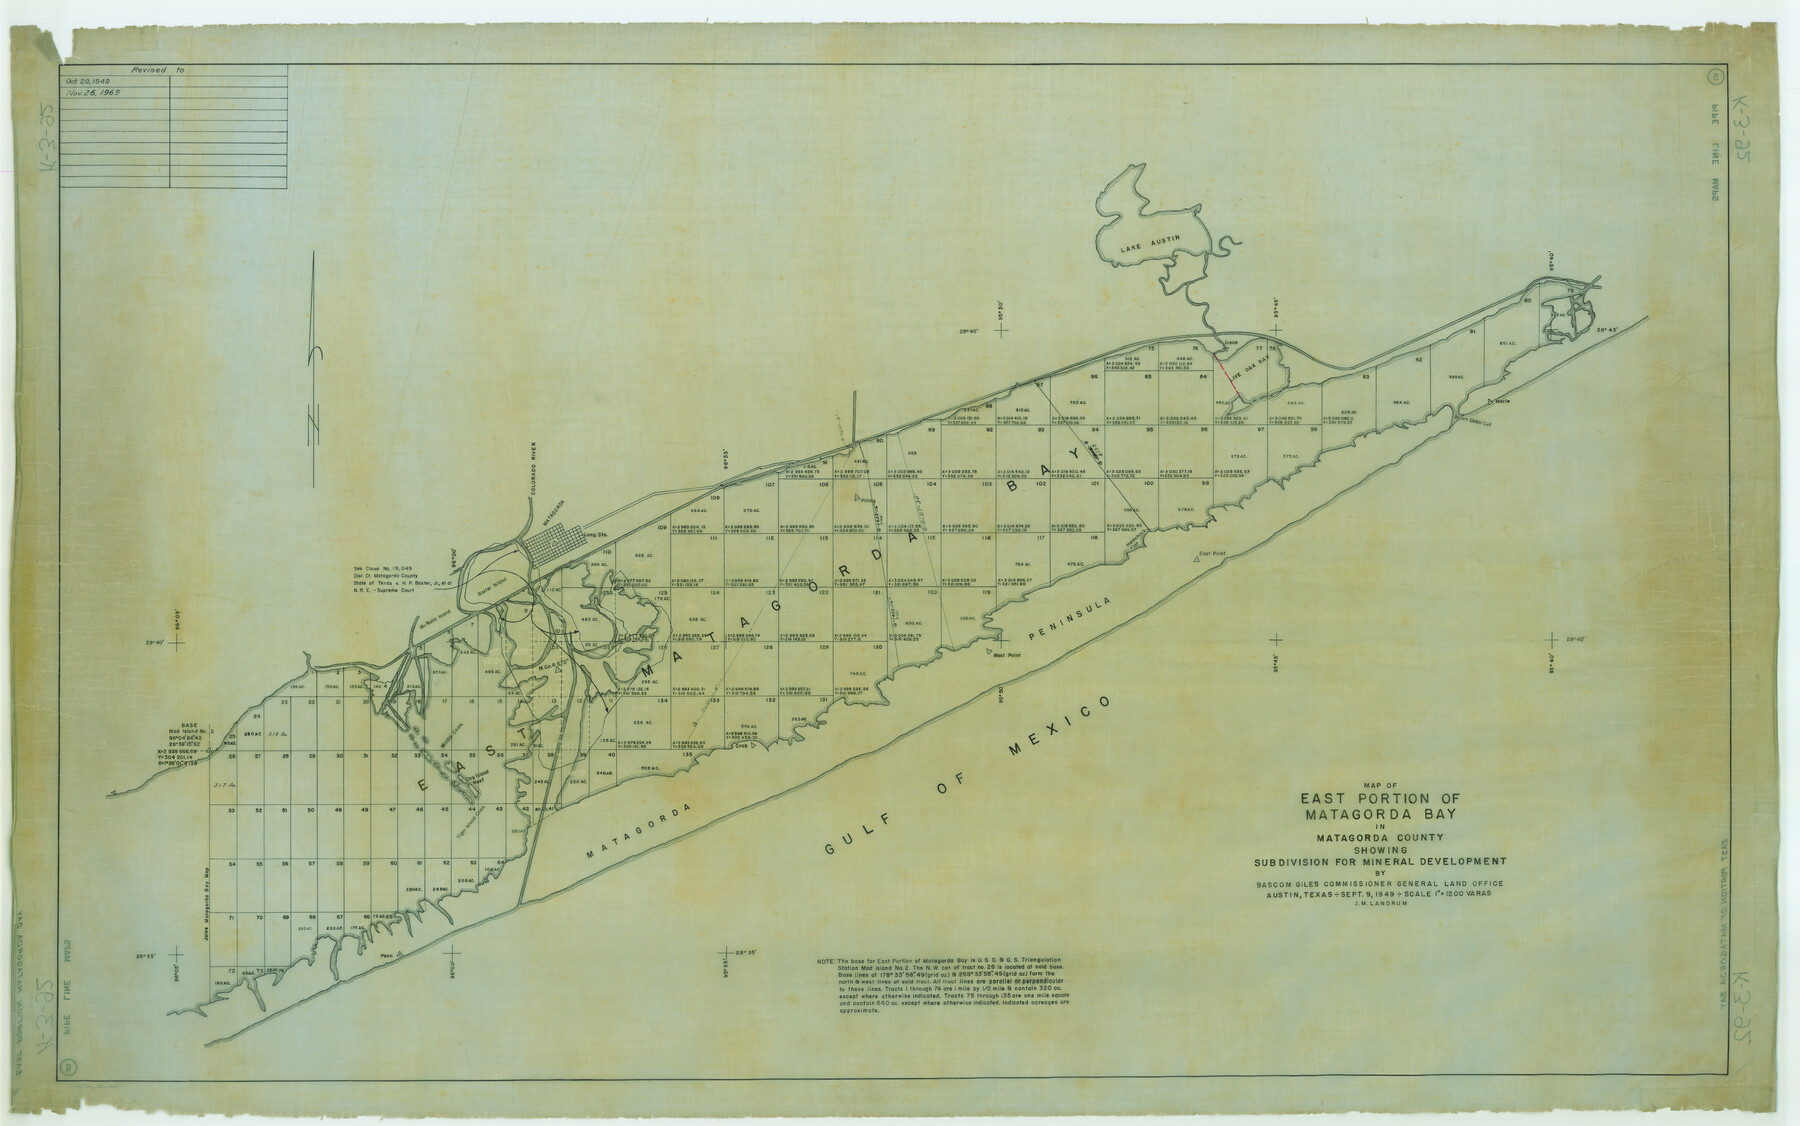 65809, Map of east portion of Matagorda Bay in Matagorda County showing subdivision for mineral development, General Map Collection